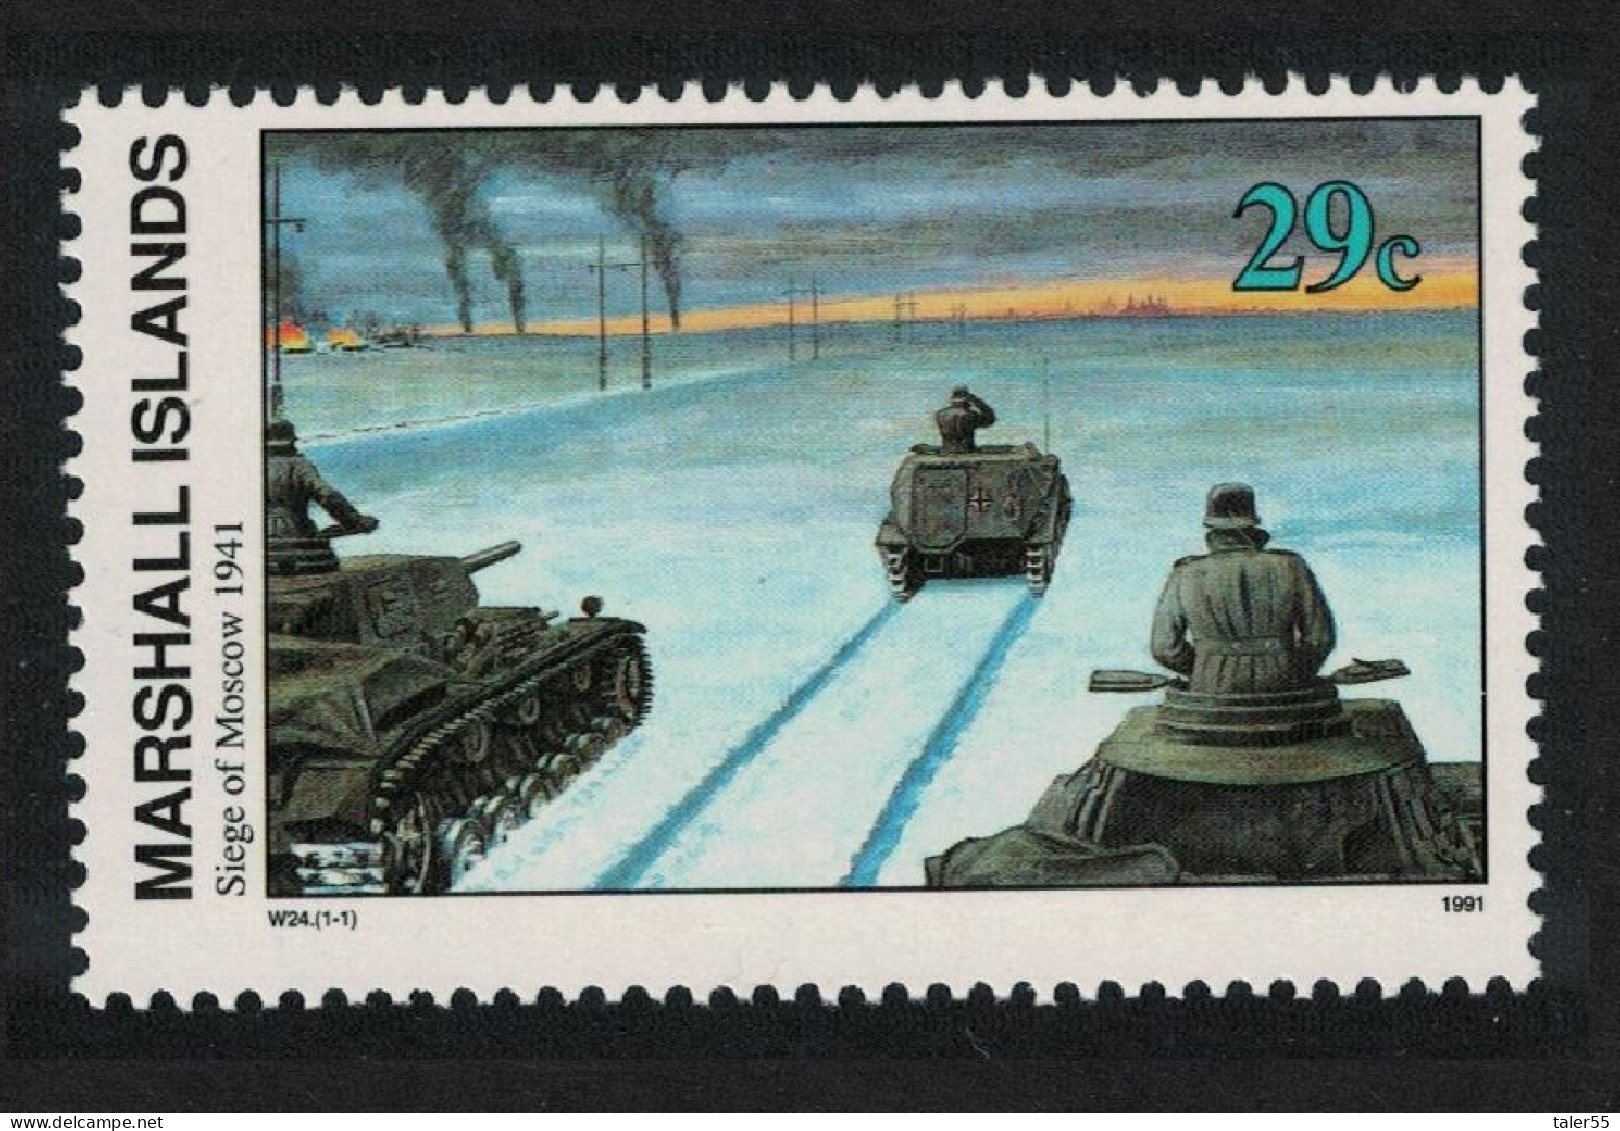 Marshall Is. Siege Of Moscow 1941 WWII 1991 MNH SG#373 - Marshall Islands